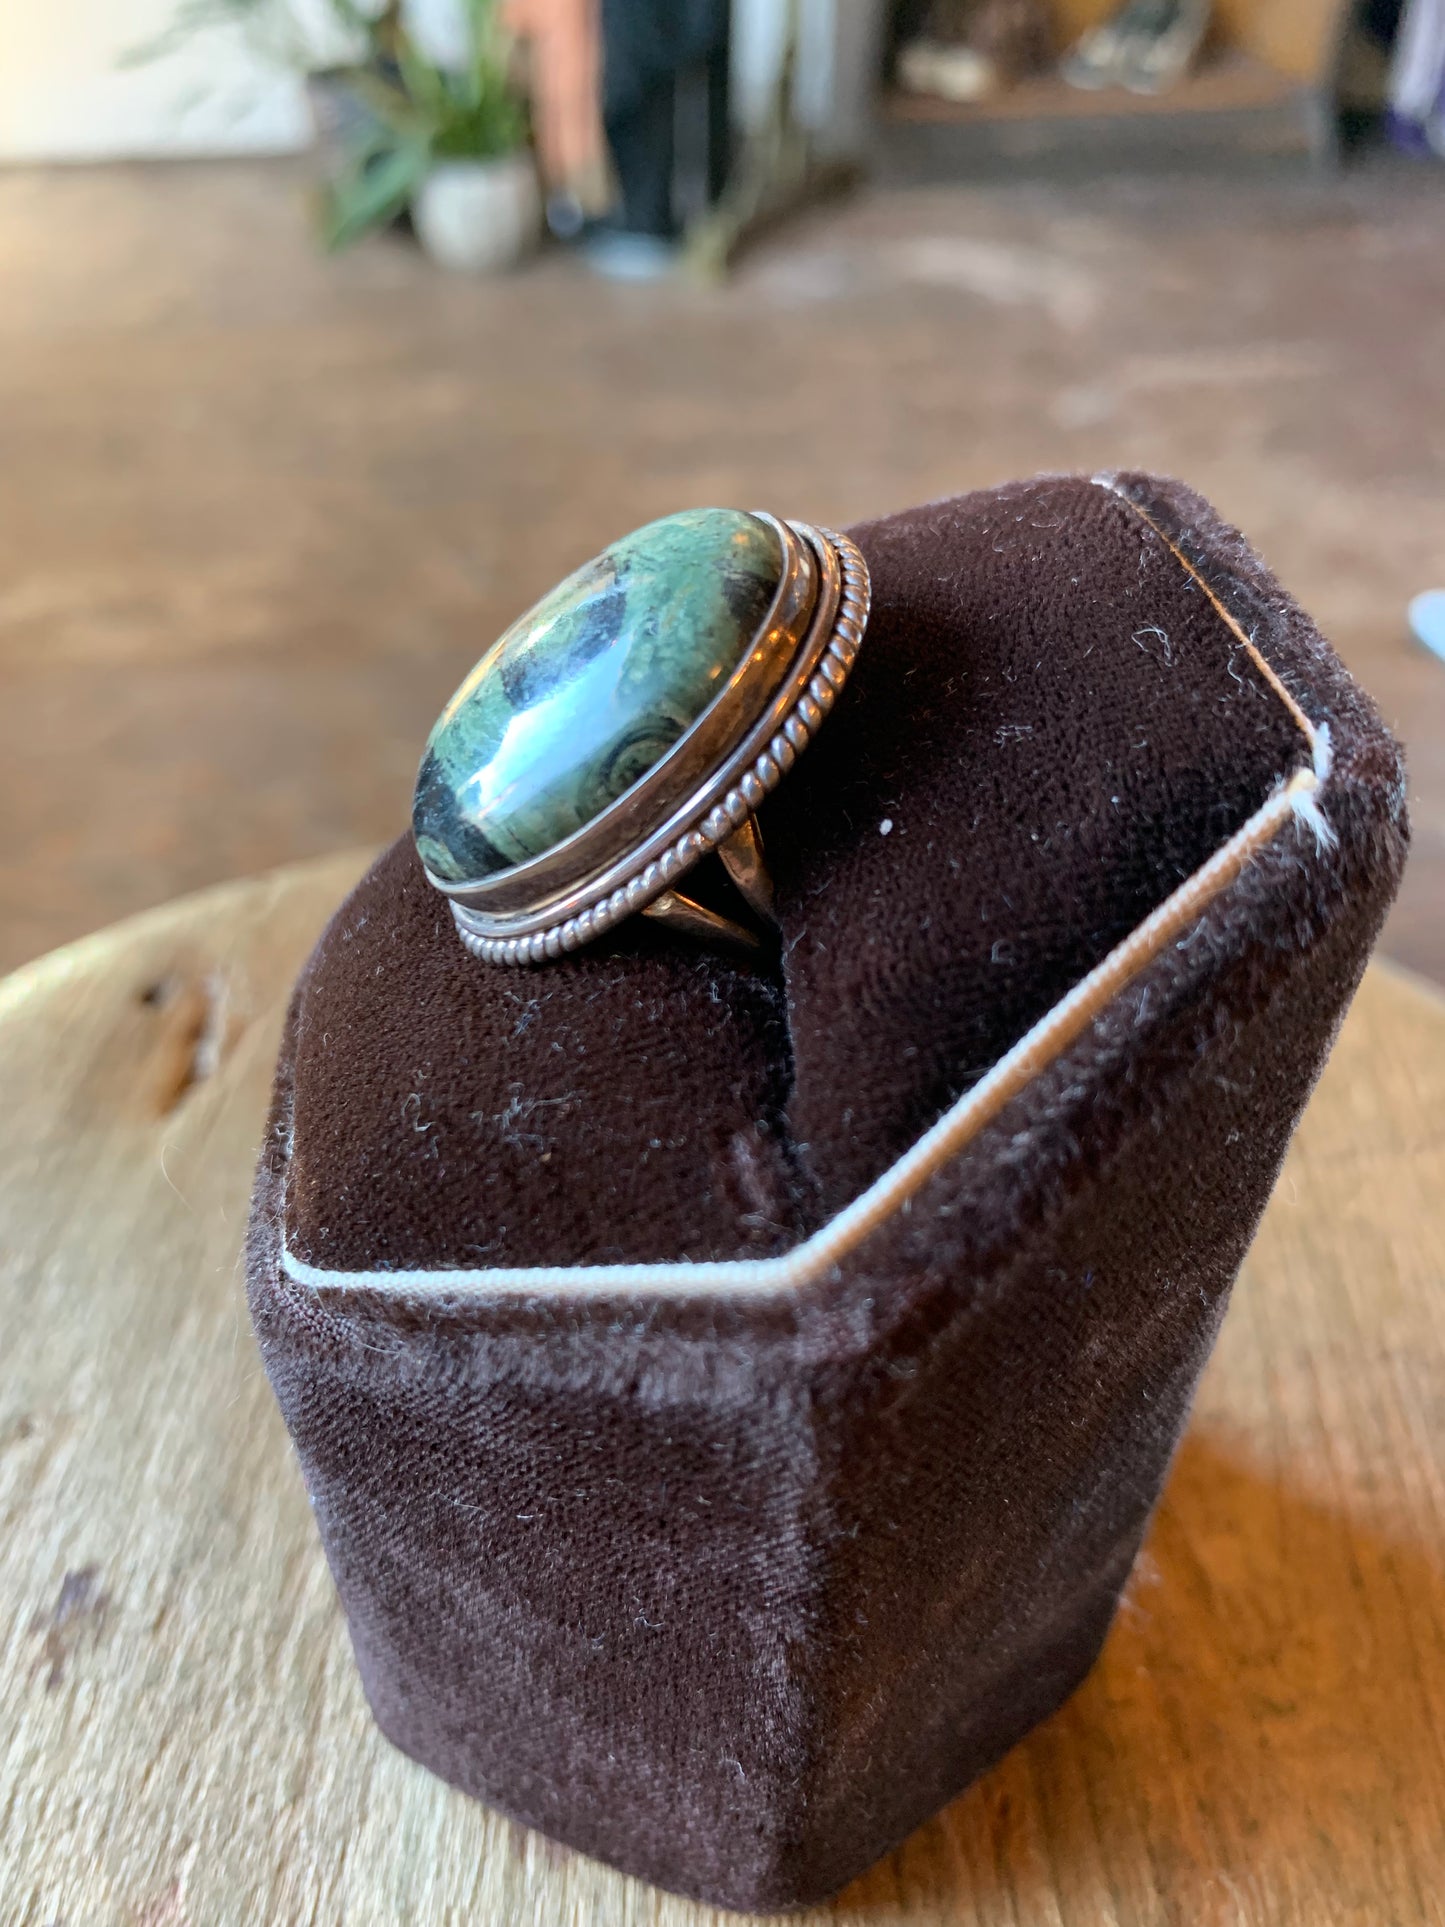 Green Oval Agate Sterling Ring